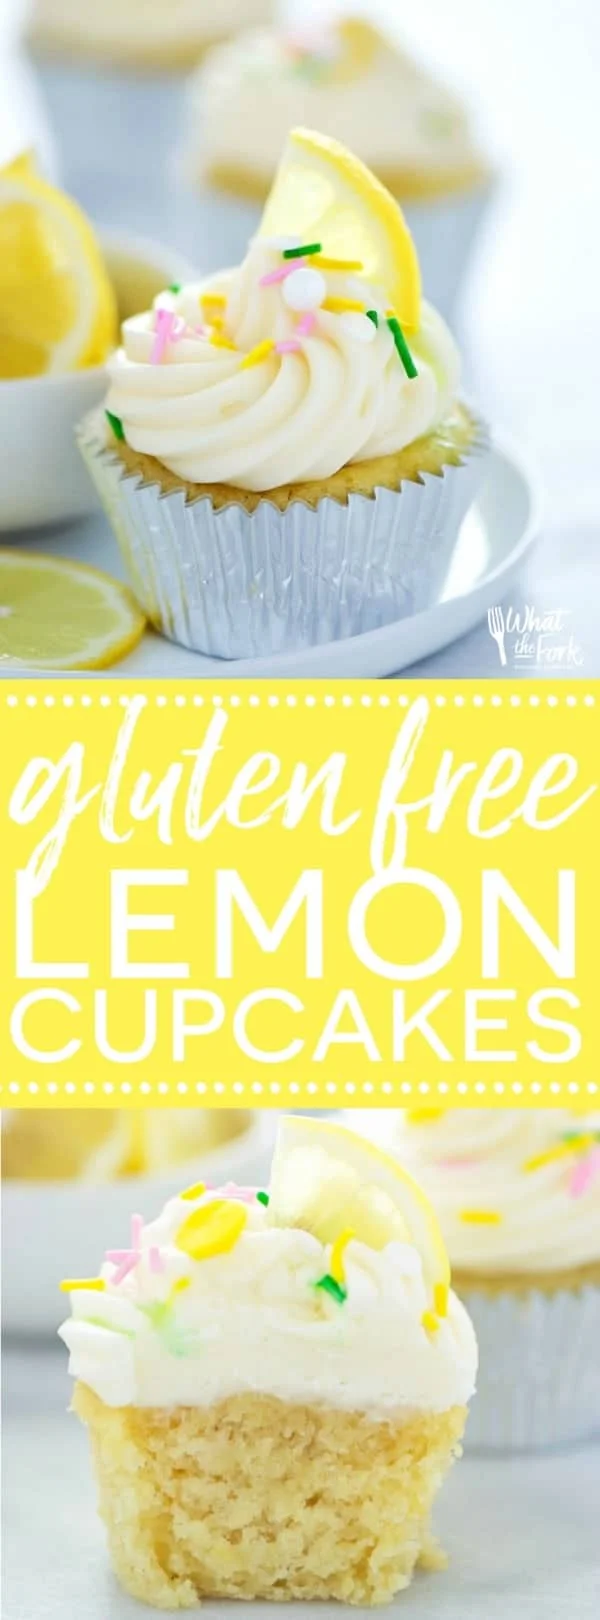 Gluten Free Lemon Cupcakes with Cream Cheese Frosting - these are full of lemon flavor with the perfect cake texture! Recipe from @whattheforkblog | whattheforkfoodblog | gluten free cupcakes | gluten free desserts | gluten free baking | gluten free cake recipes | birthday cake ideas | cupcake recipes | lemon desserts